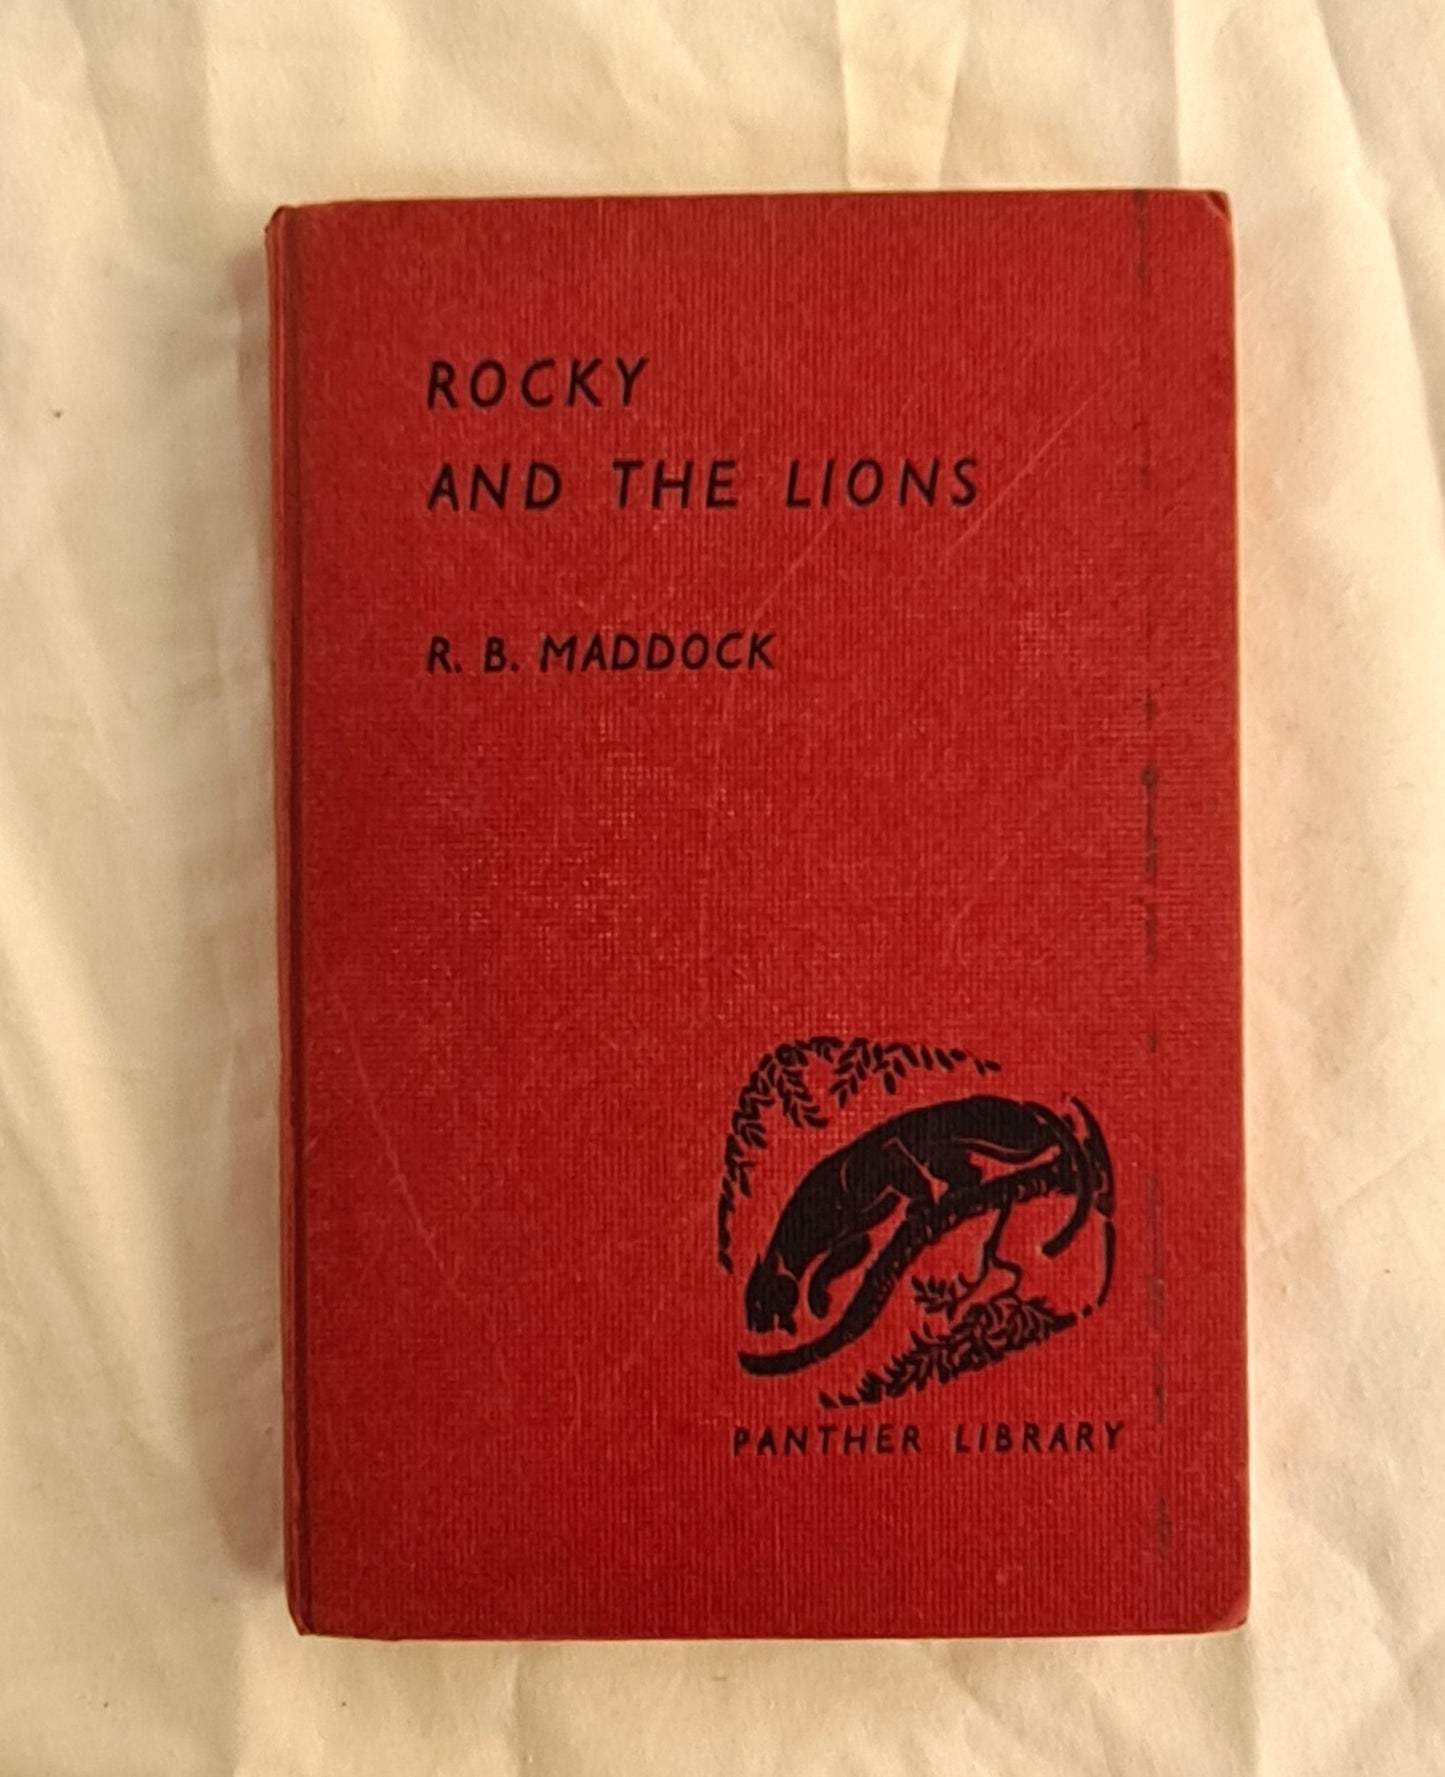 Rocky and the Lions  by R. B. Maddock  illustrated by Robert Hodgson